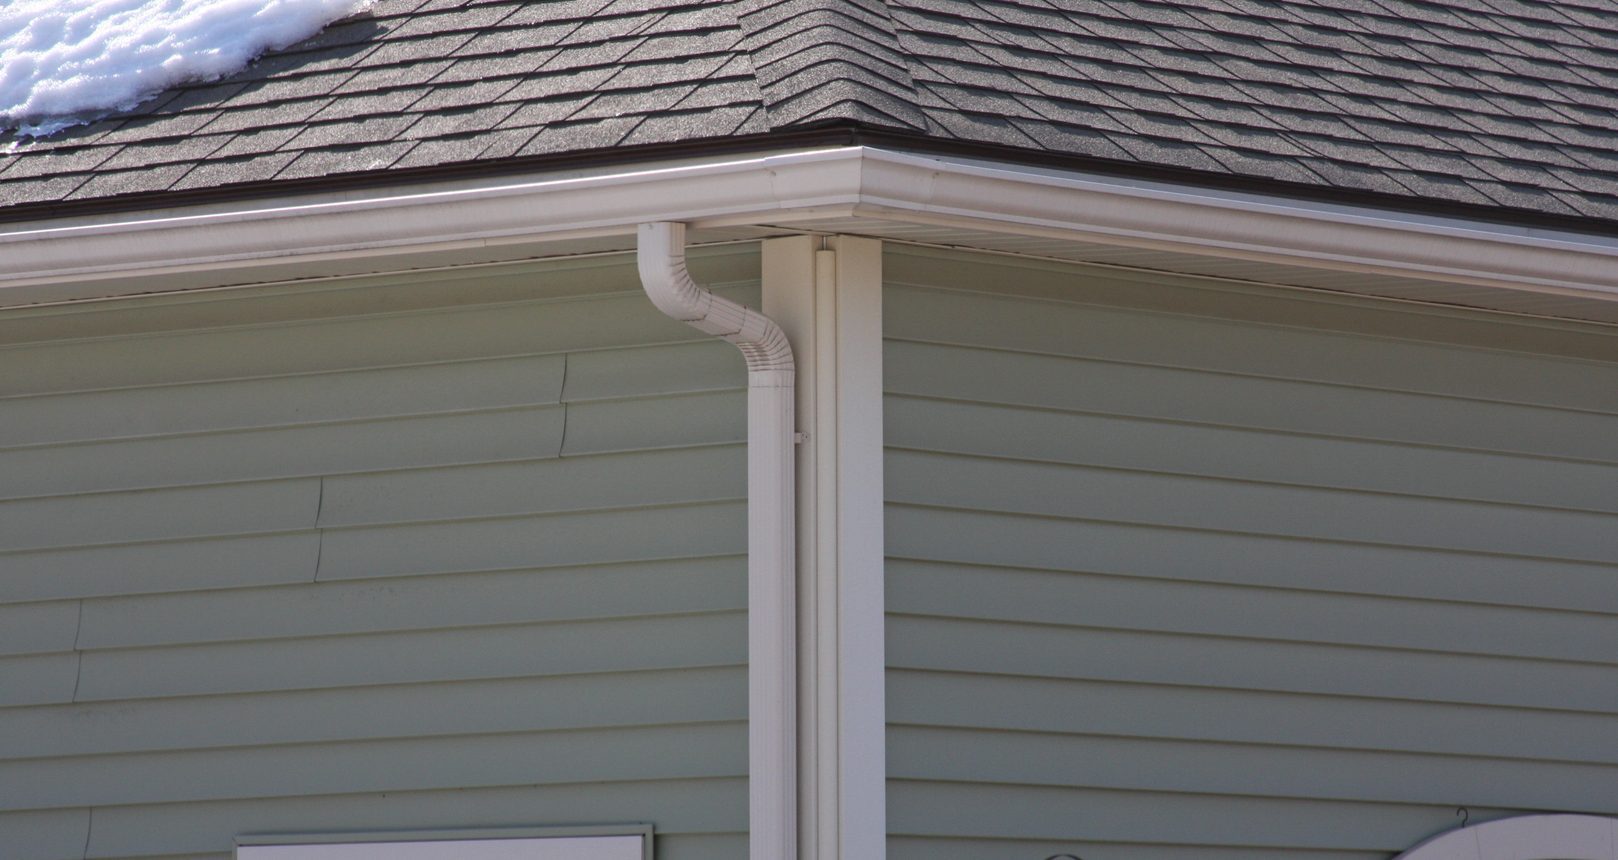 White Gutters & Snow-Covered Roofing Surface